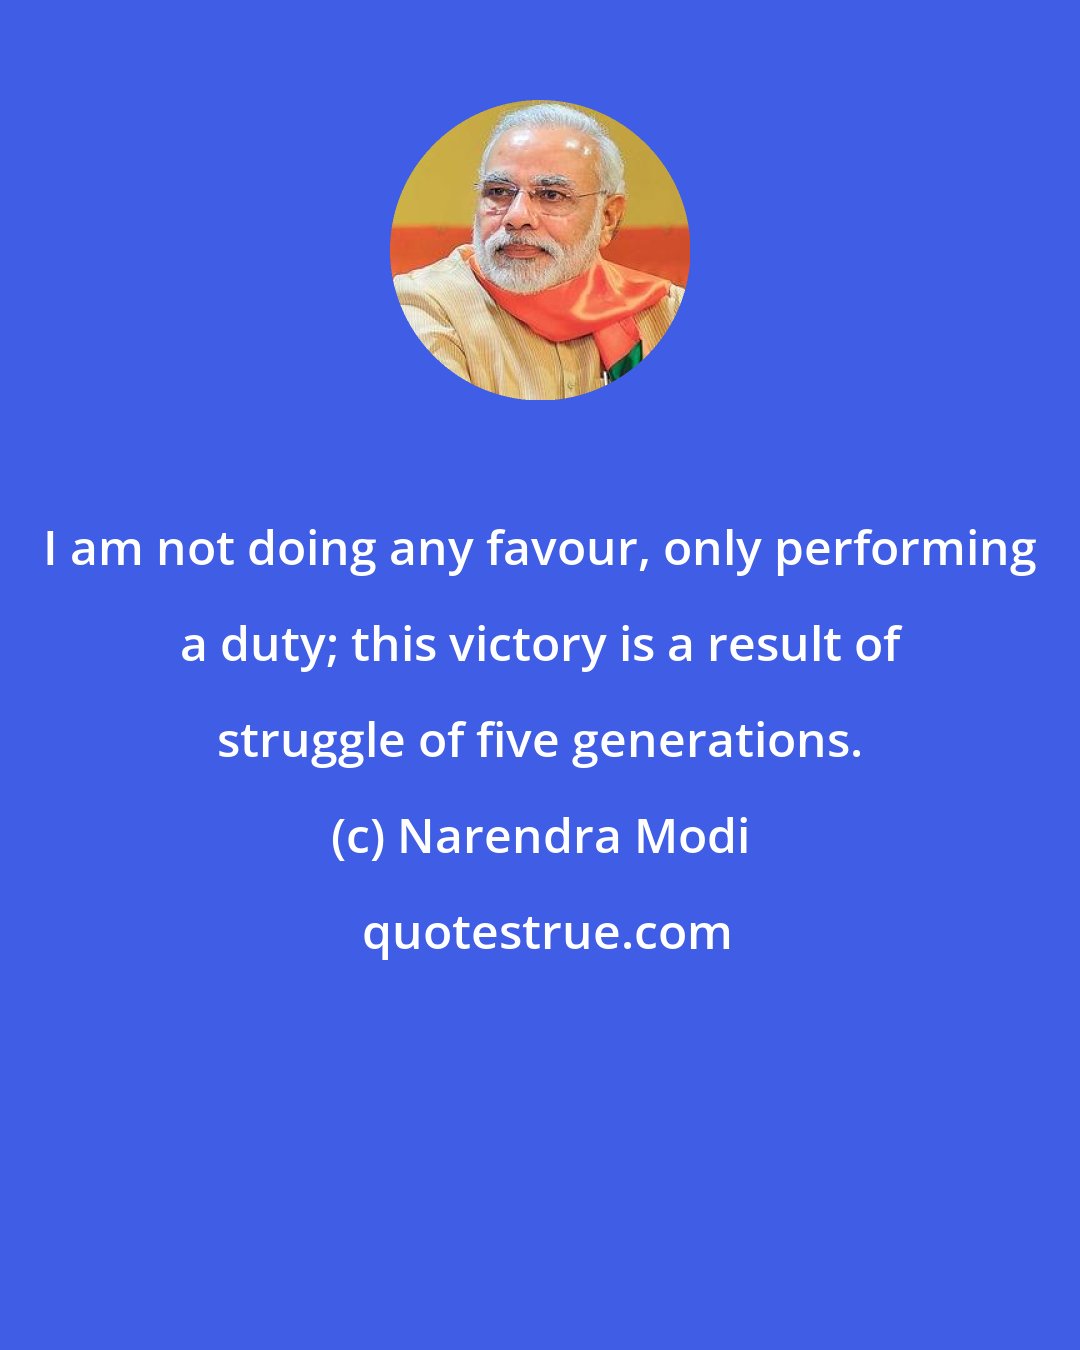 Narendra Modi: I am not doing any favour, only performing a duty; this victory is a result of struggle of five generations.